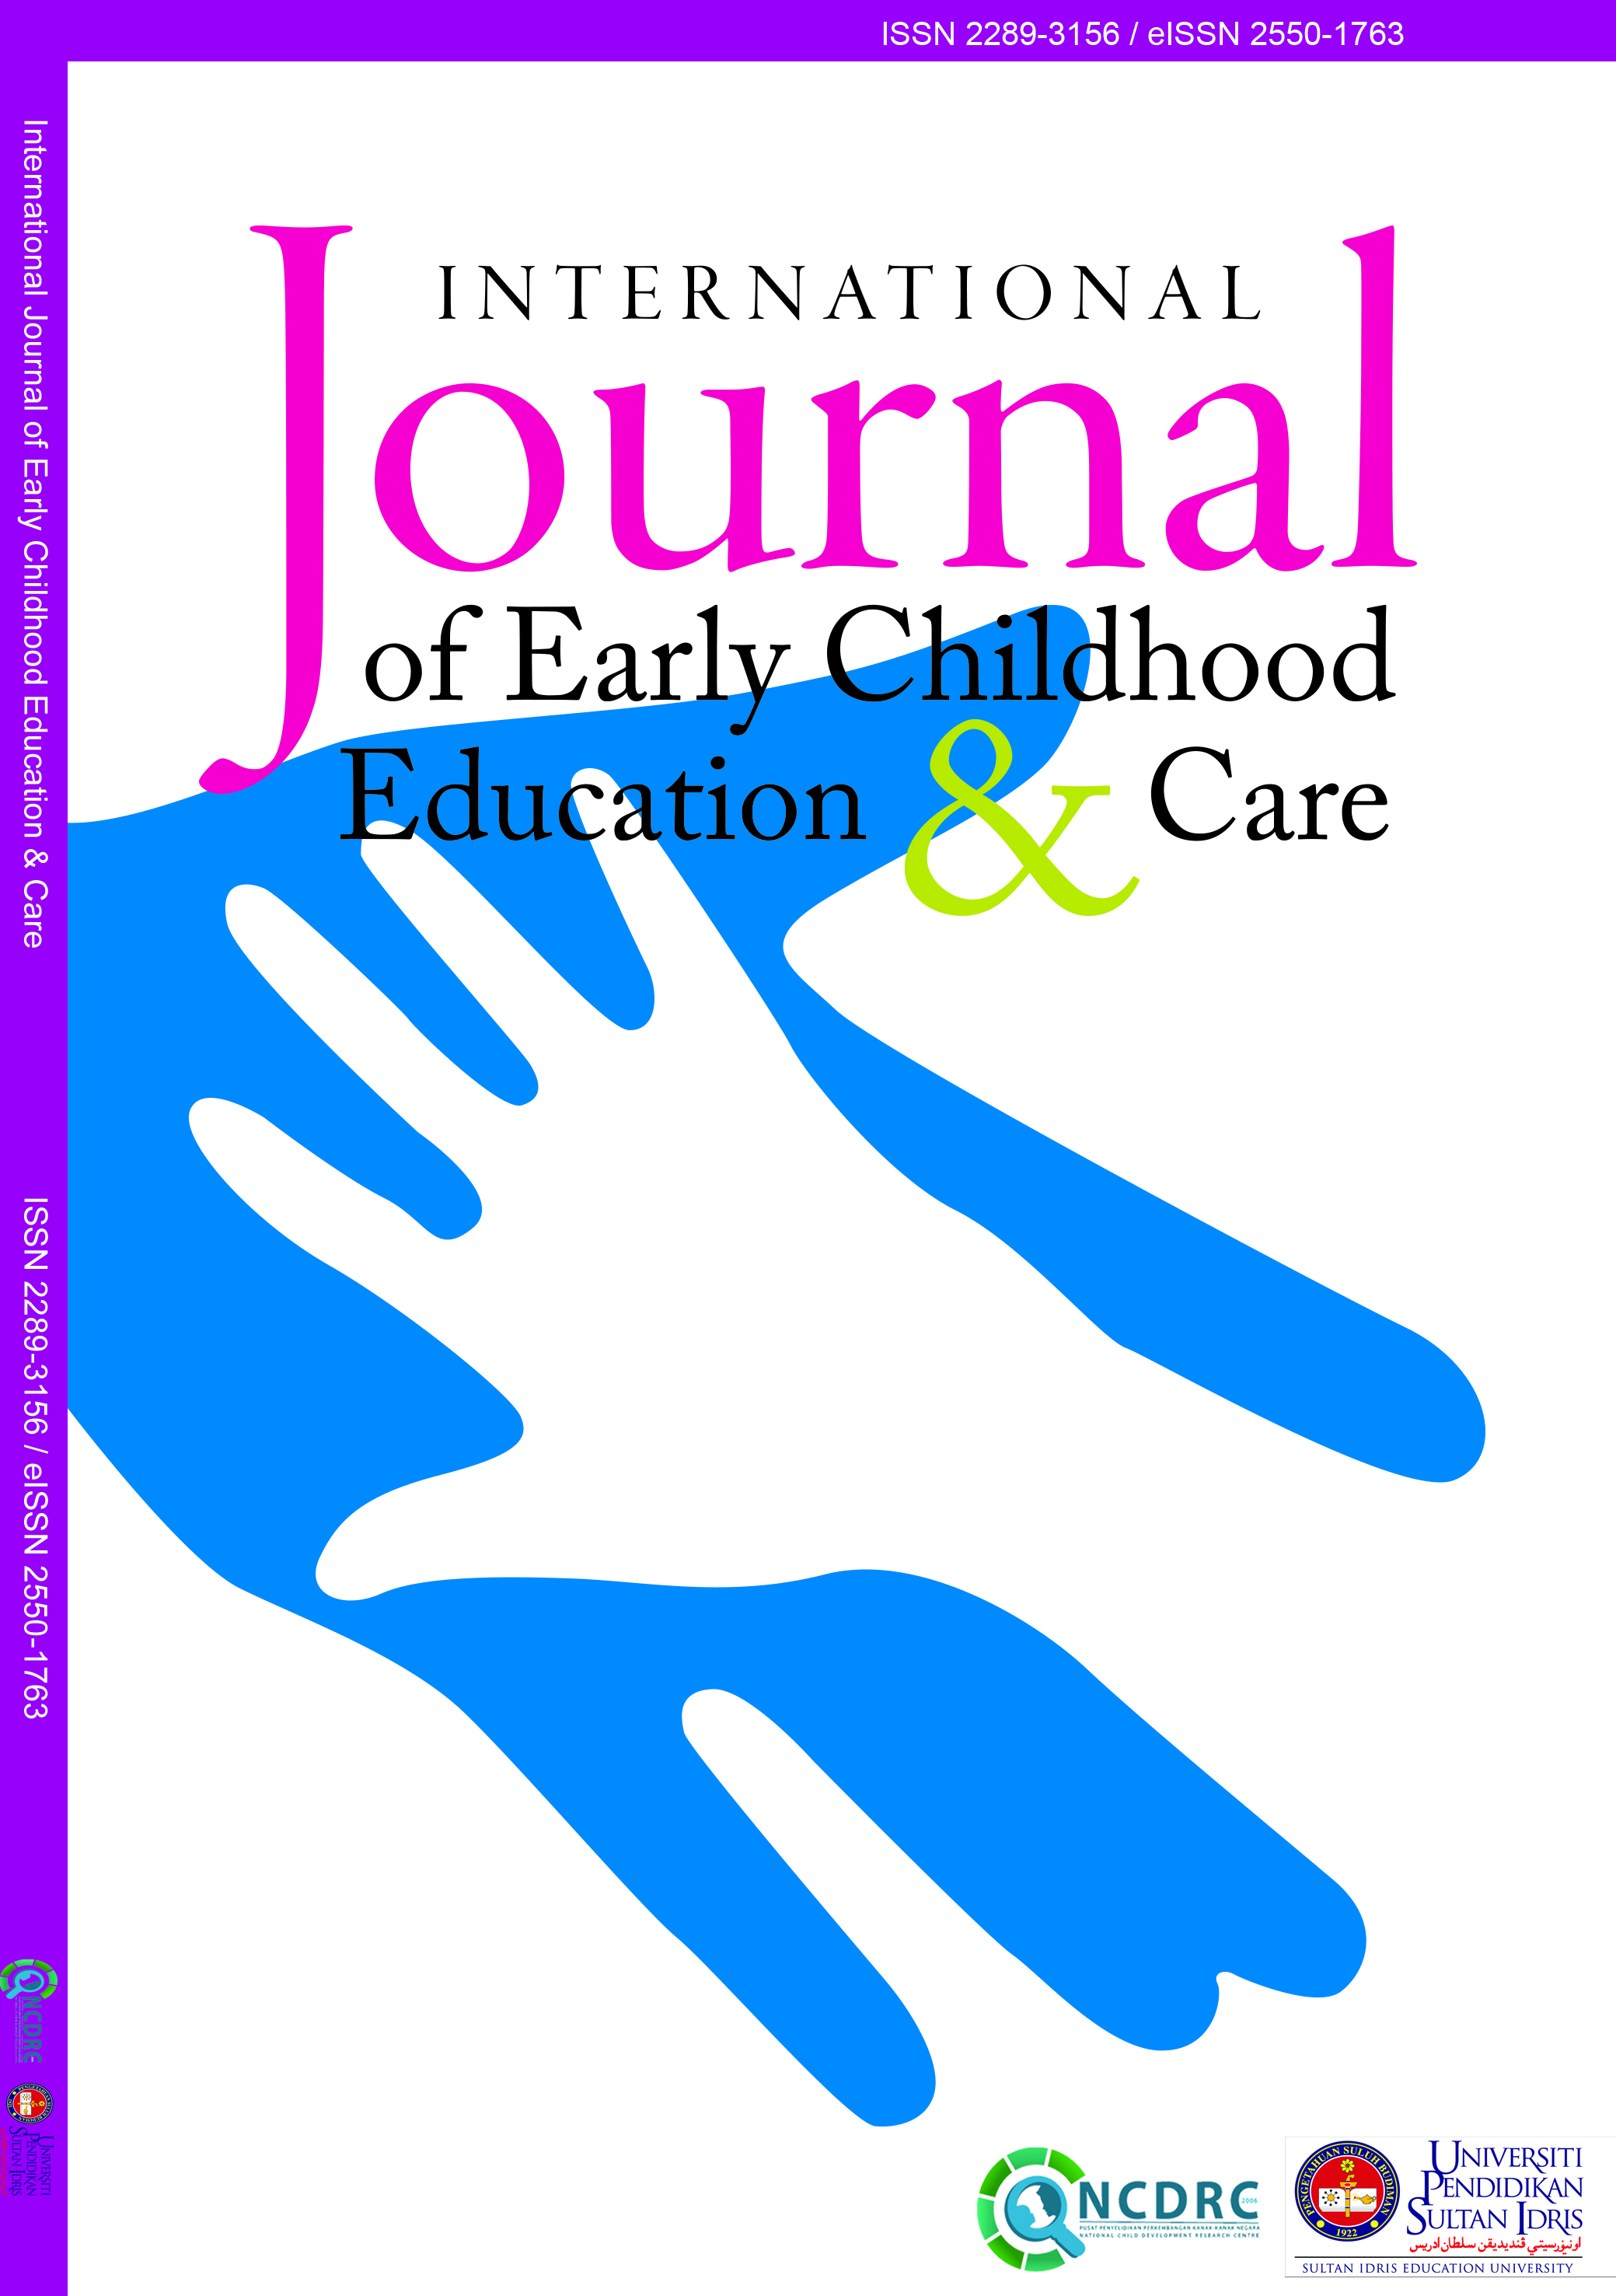 					View Vol. 5 (2016): International Journal of Early Childhood Education and Care
				